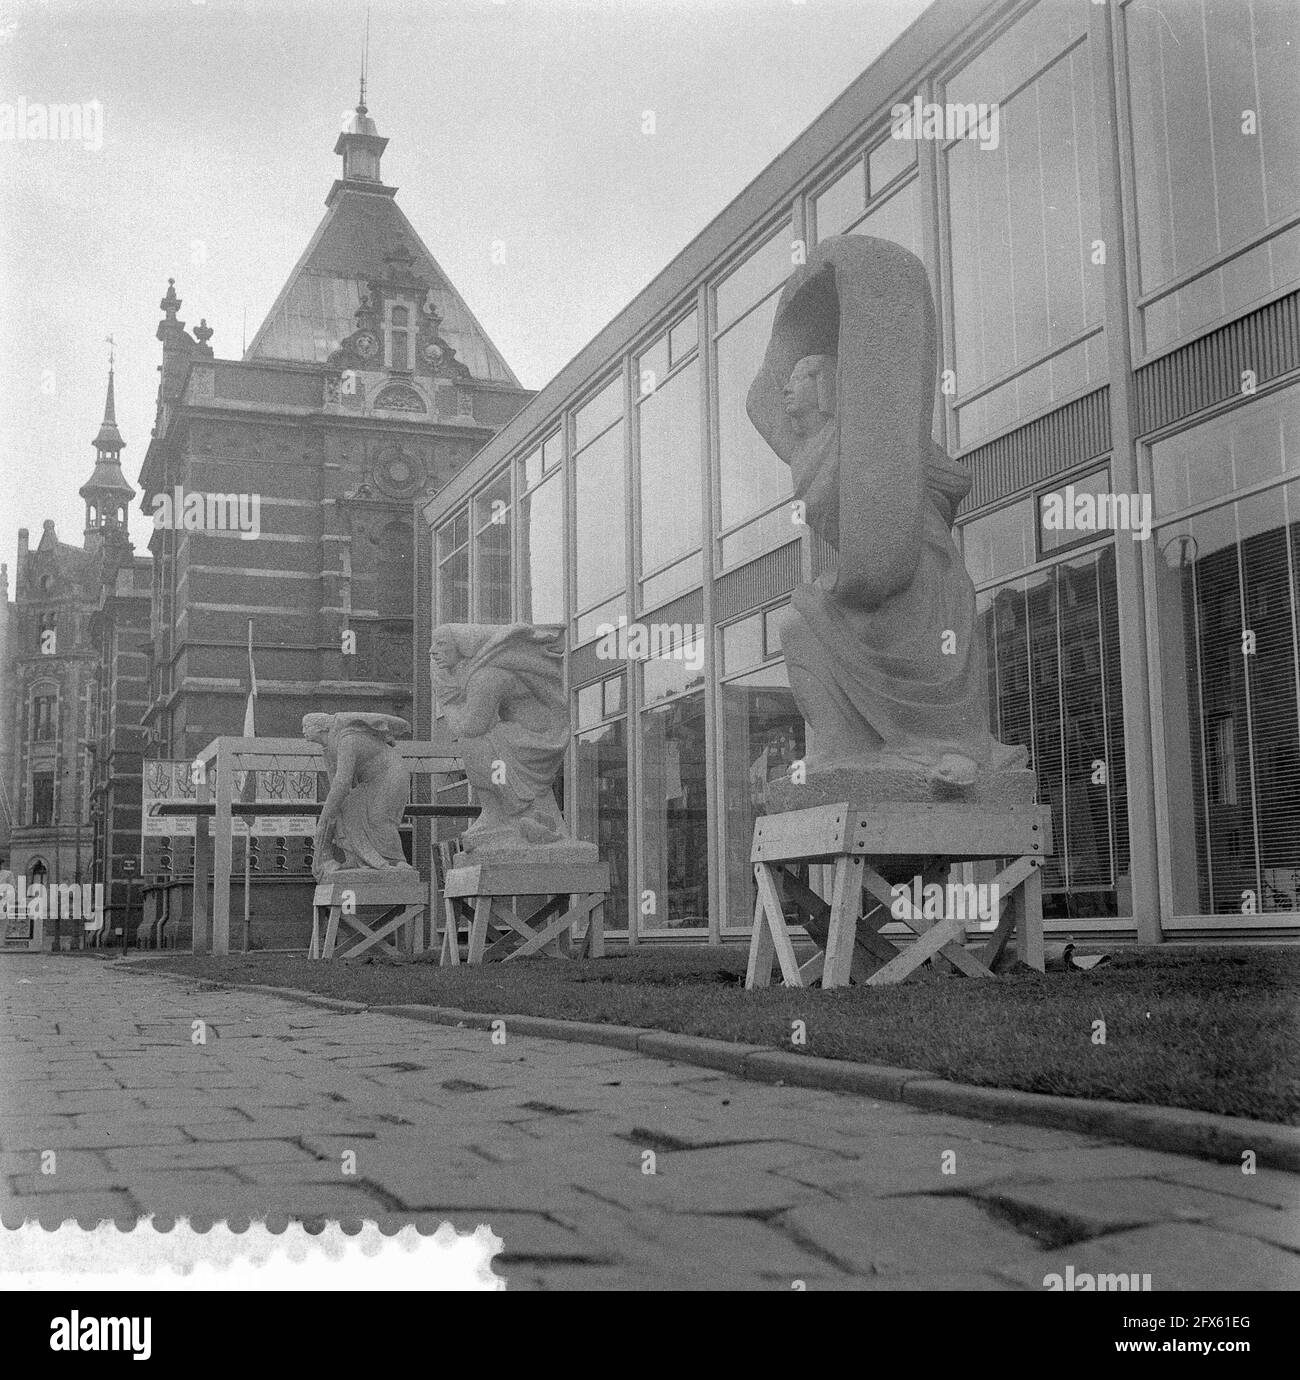 H. van Lith in front of Gemeentelijk Museum voor Philipsmonument / dark, May 31, 1957, The Netherlands, 20th century press agency photo, news to remember, documentary, historic photography 1945-1990, visual stories, human history of the Twentieth Century, capturing moments in time Stock Photo